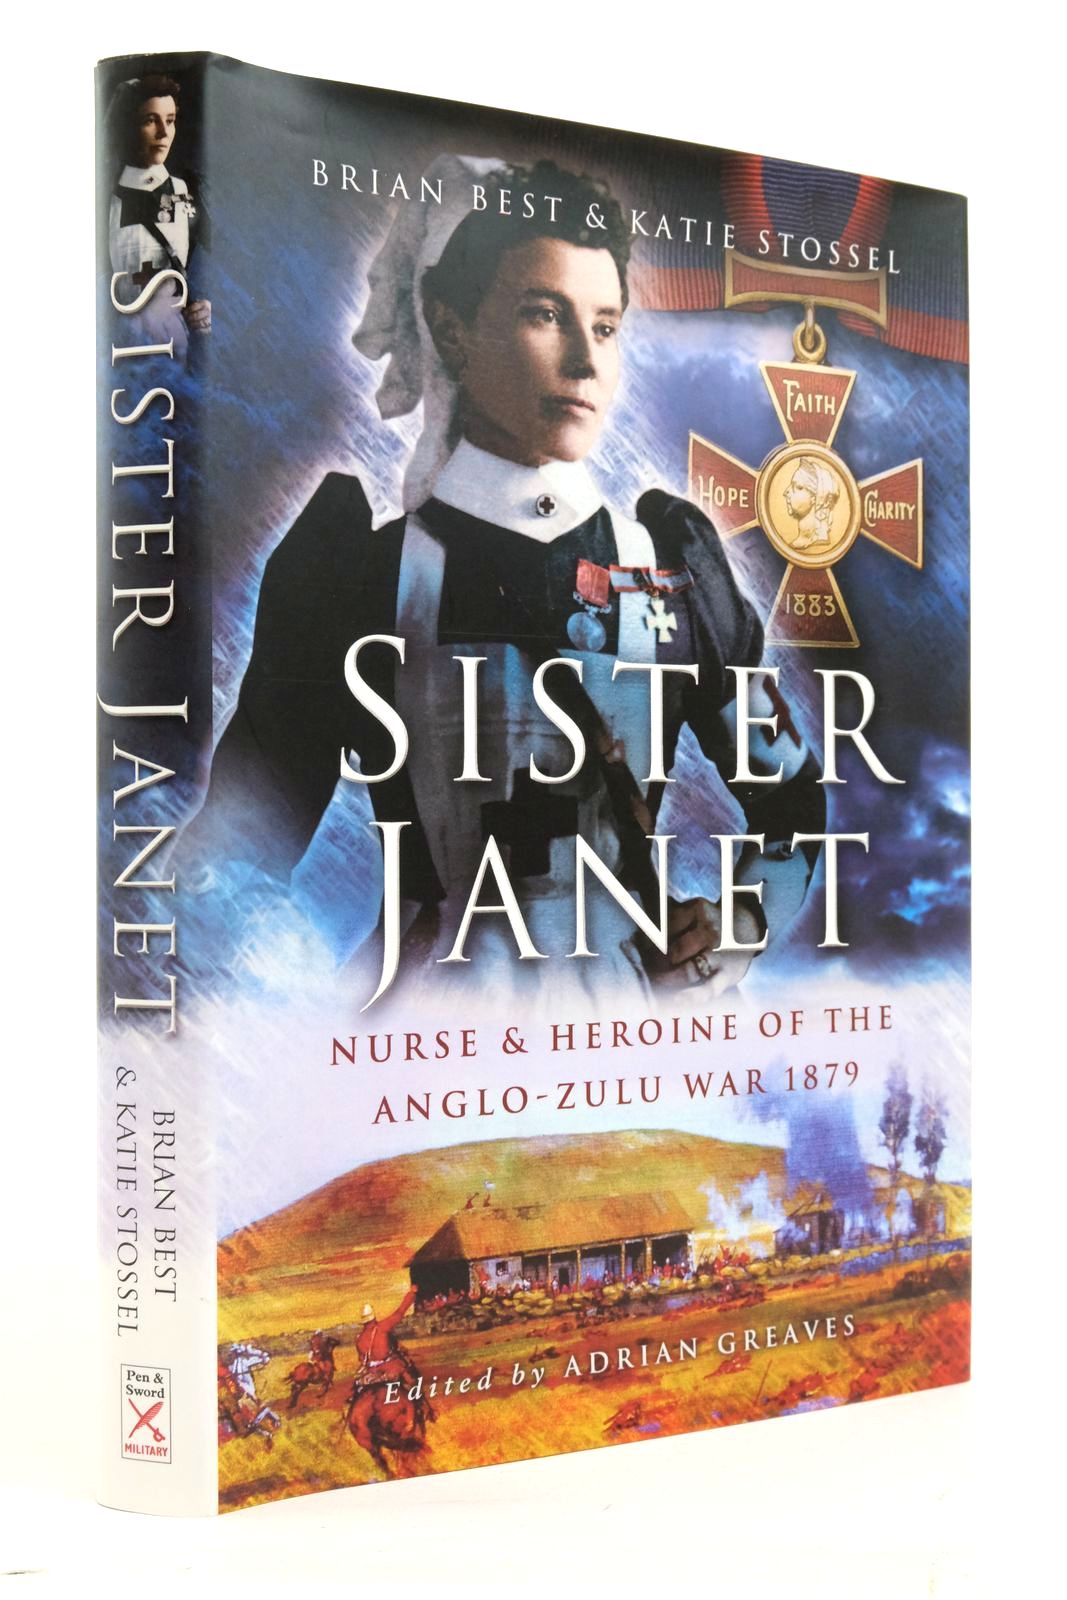 Photo of SISTER JANET NURSE AND HEROINE OF THE ANGLO-ZULU WAR written by Best, Brian
Stossel, Katie published by Pen & Sword Military (STOCK CODE: 2138334)  for sale by Stella & Rose's Books